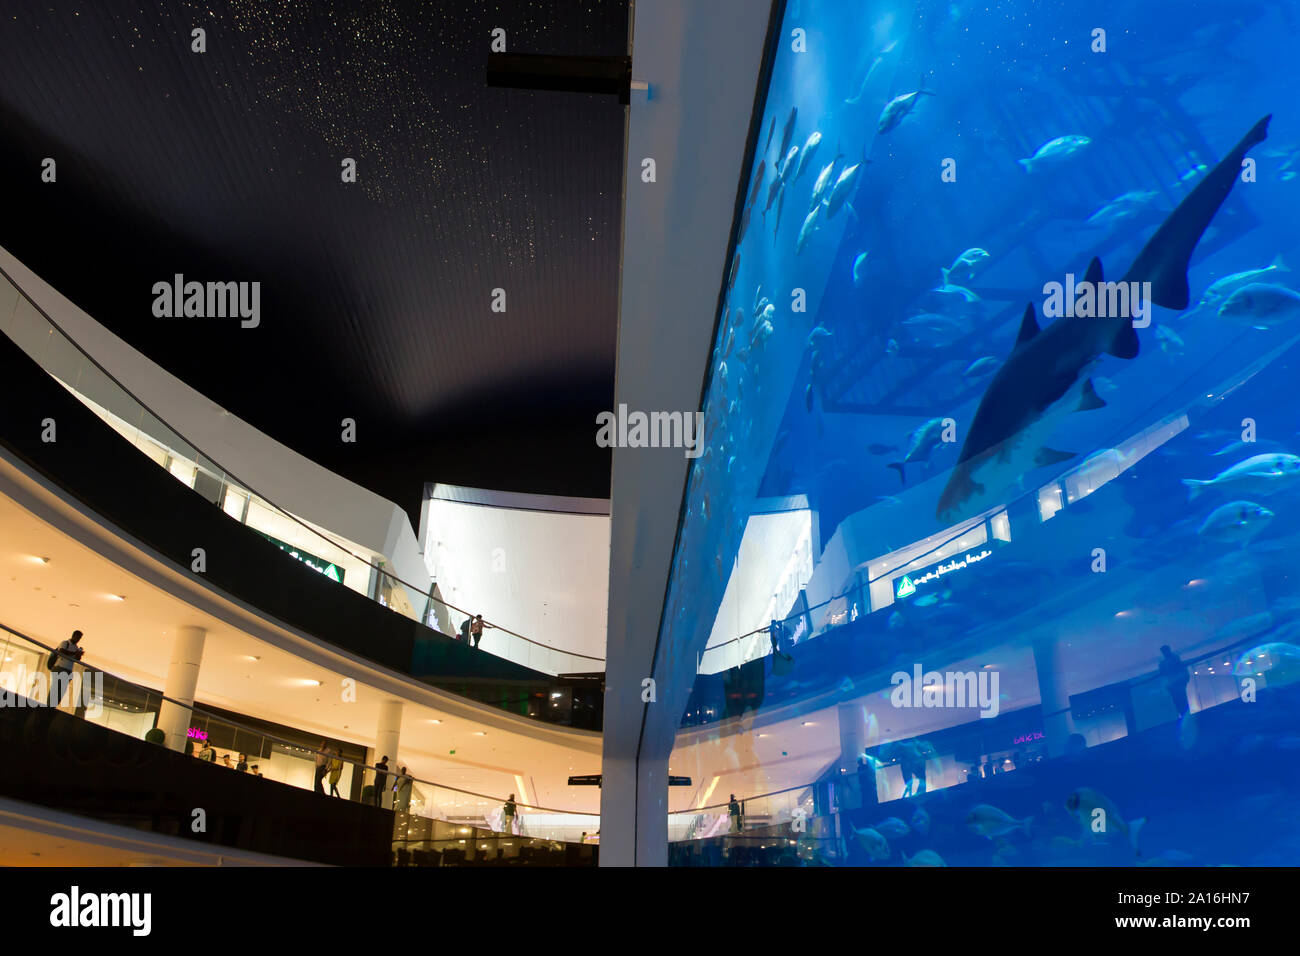 DUBAI - Visitors of the Dubai mall, the world's largest shopping center, in front of the aquarium. Stock Photo